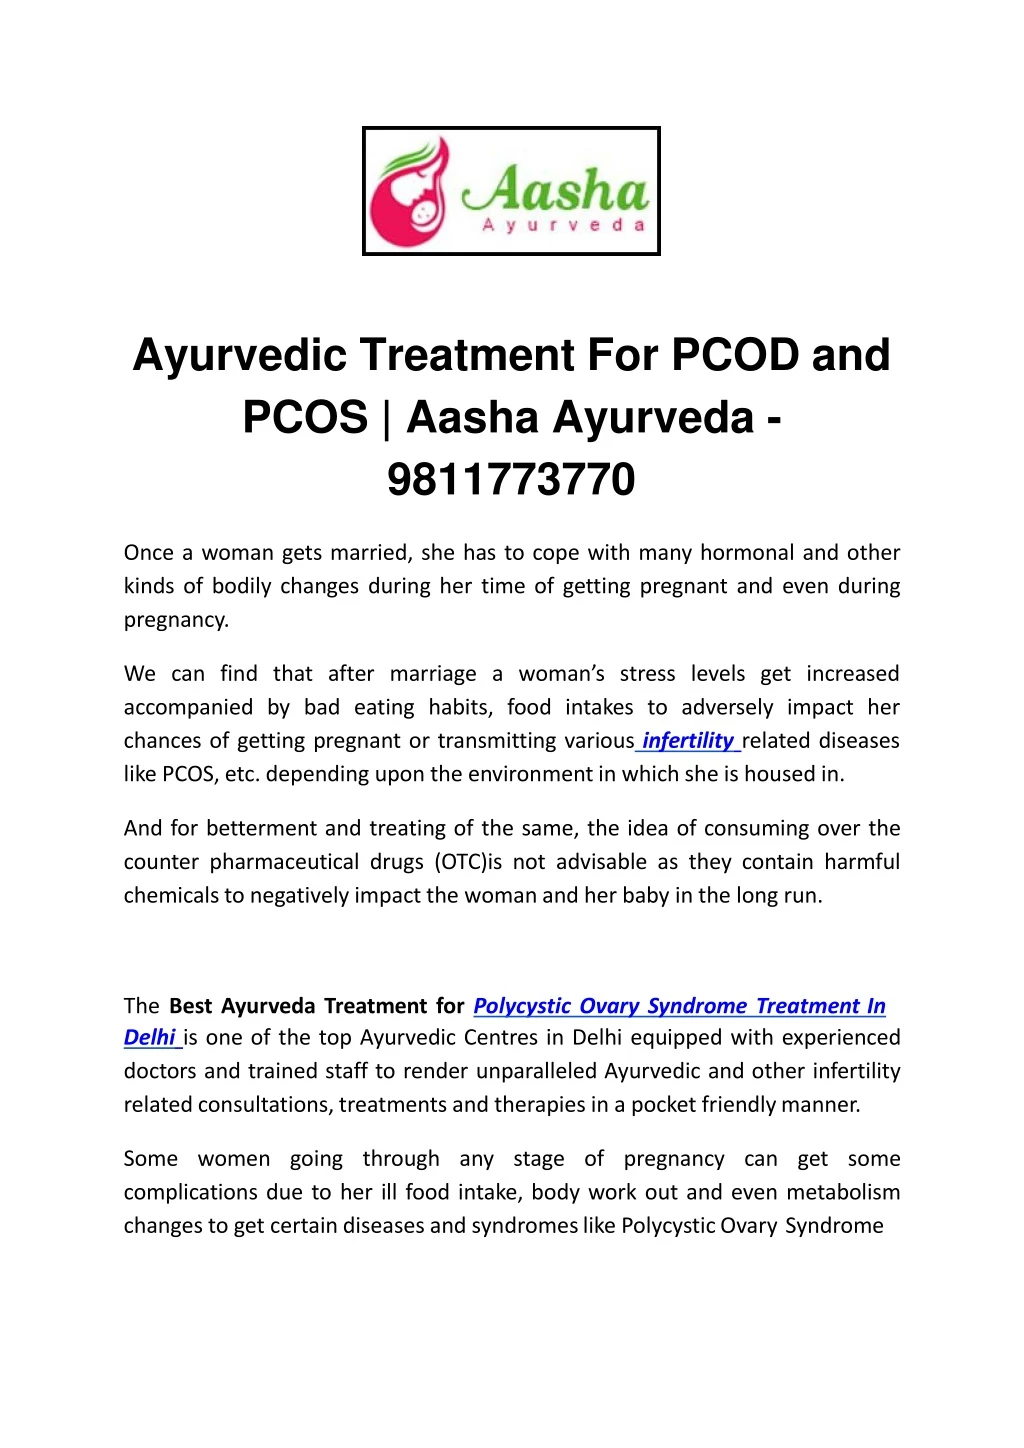 ayurvedic treatment for pcod and pcos aasha ayurveda 9811773770